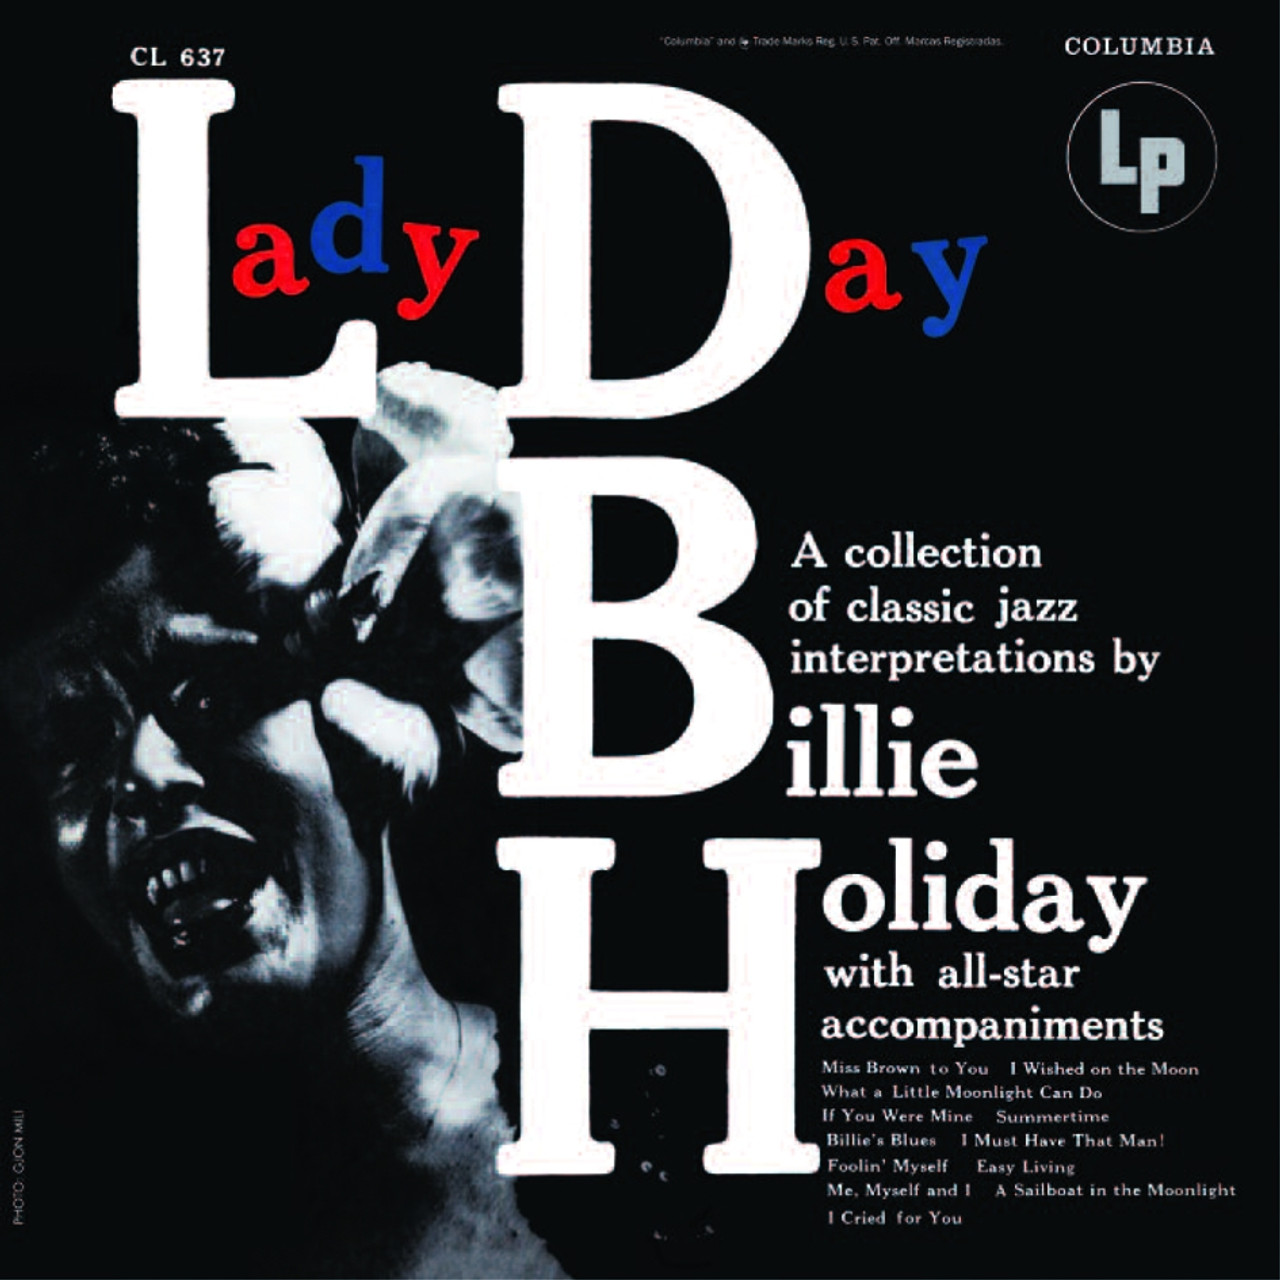 salgsplan modtage dyb Jazz Vinyl | Billie Holiday: Lady Day - LP 180g Mono, Limited, Remastered,  Pure Pleasure pp637, EAN 5060149621271, Limited, Remastered